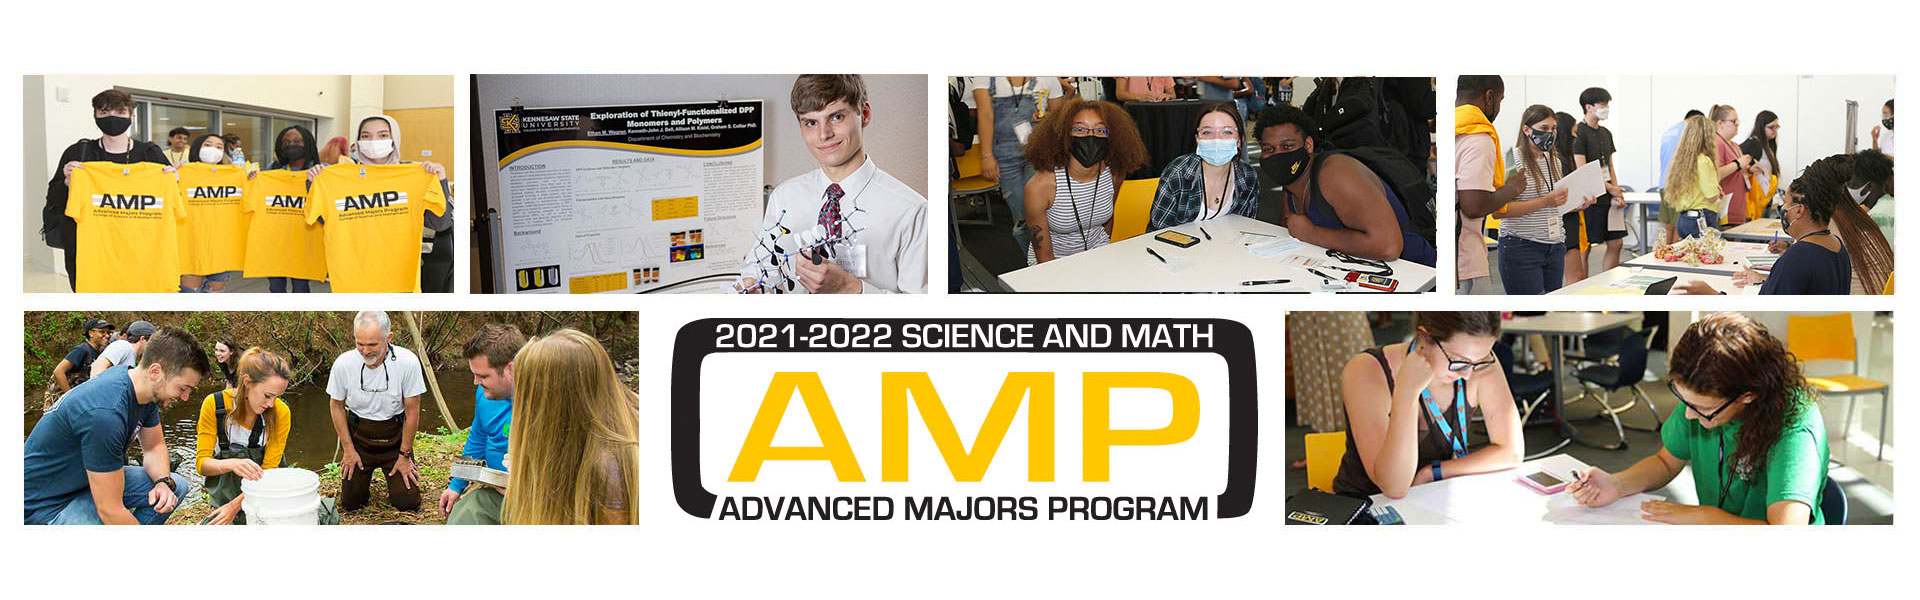 Photo collage of students in the Advanced Majors Program 2021-2022